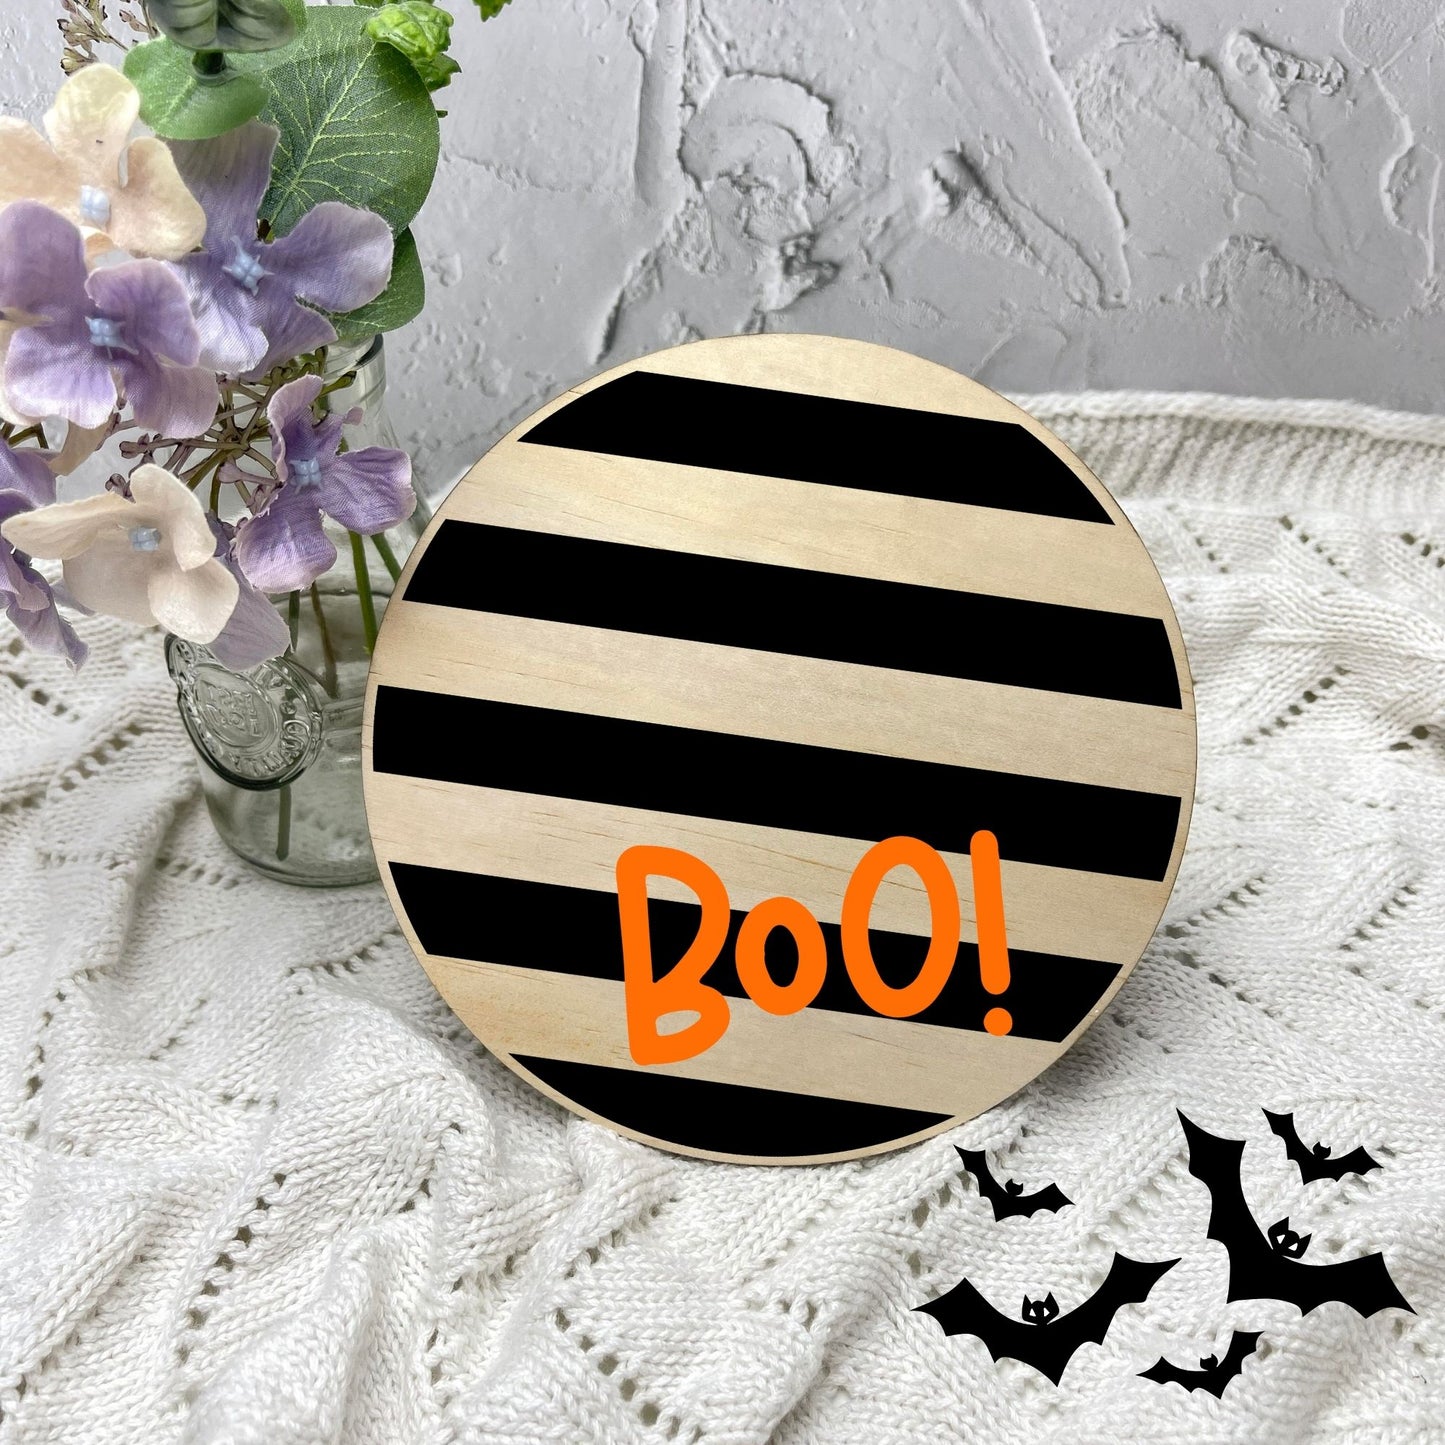 Boo! sign, Halloween Decor, Spooky Vibes, hocus pocus sign, trick or treat decor, haunted house h40